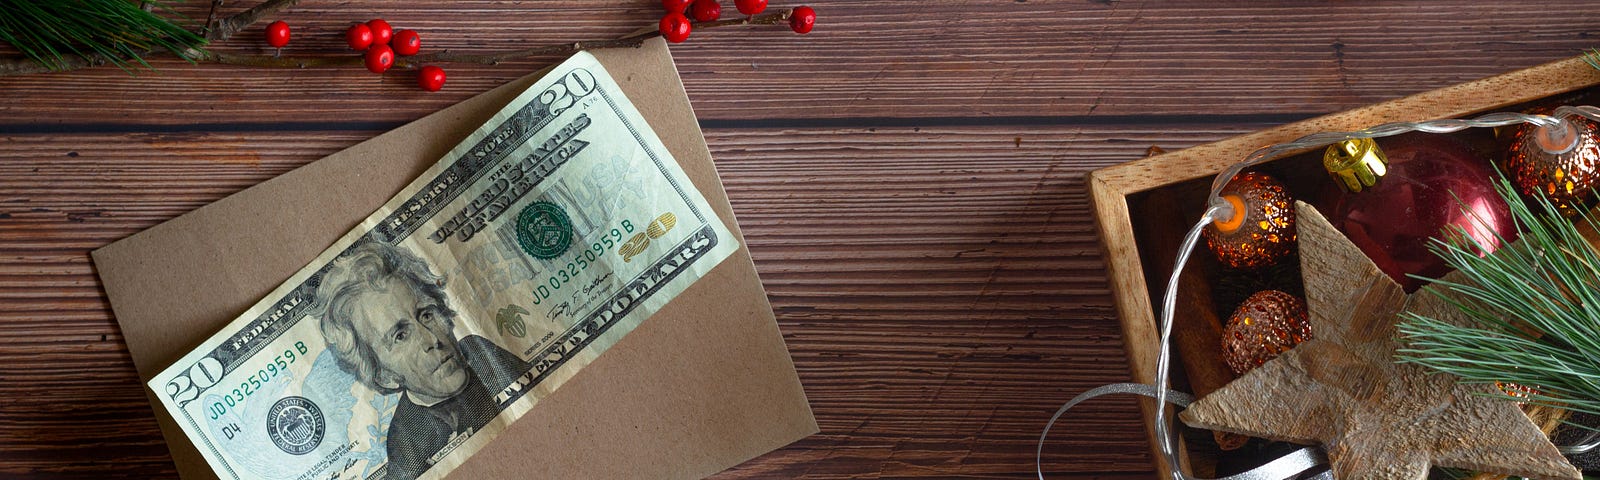 This photo shows a twenty dollar bill next to some Christmas decorations.